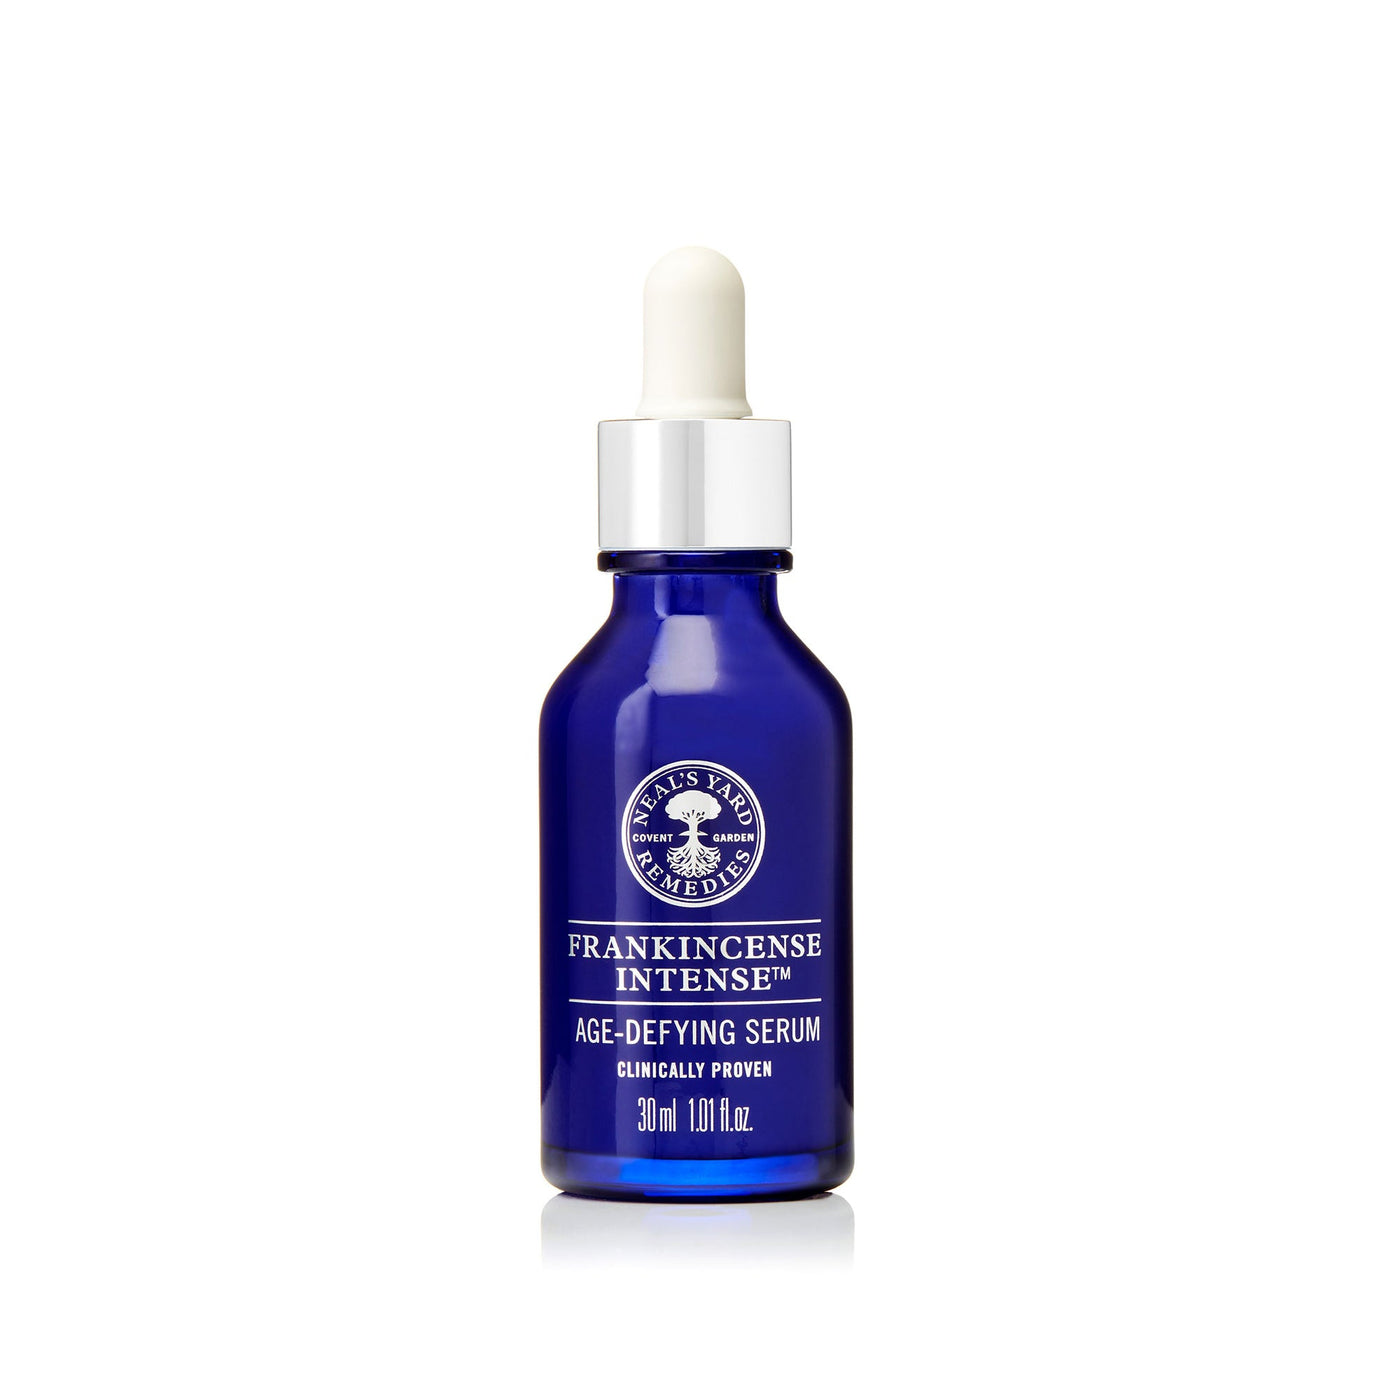 frankincense-intense-age-defying-serum-front-2417-high-res-2000px.jpg